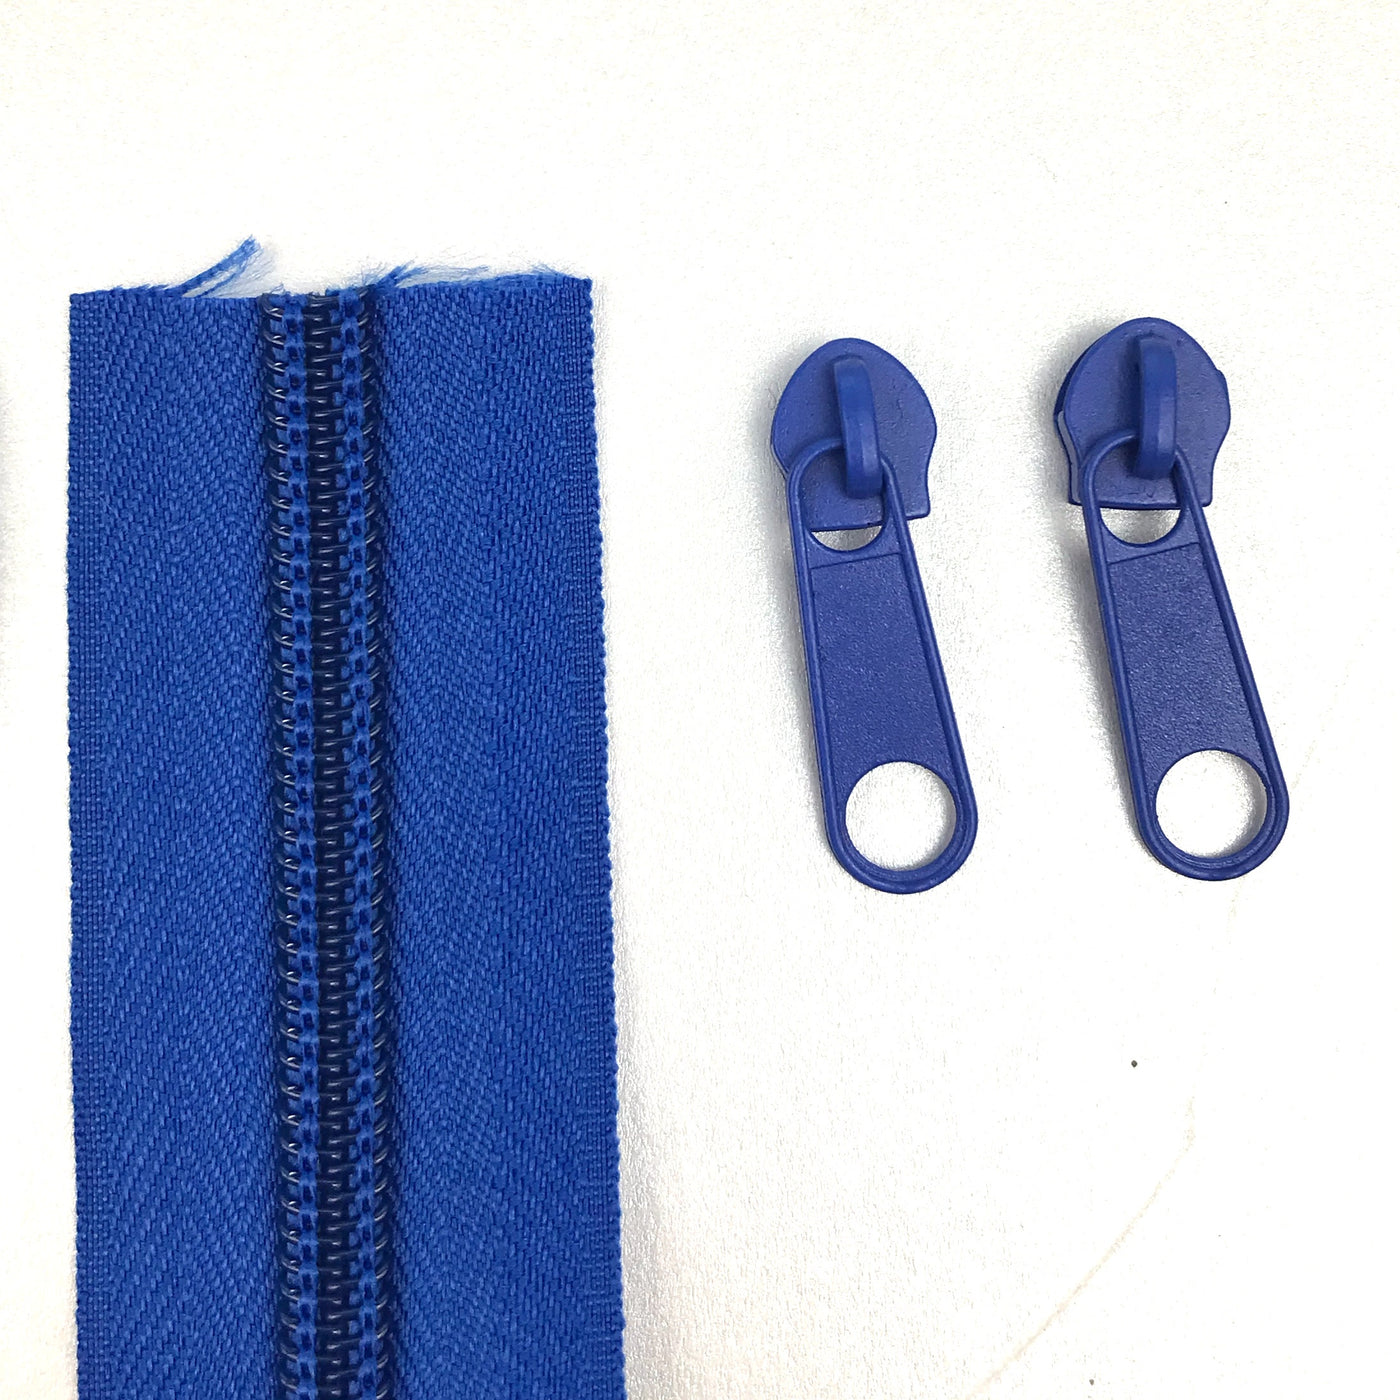 royal blue continuous long chain zipper and sliders